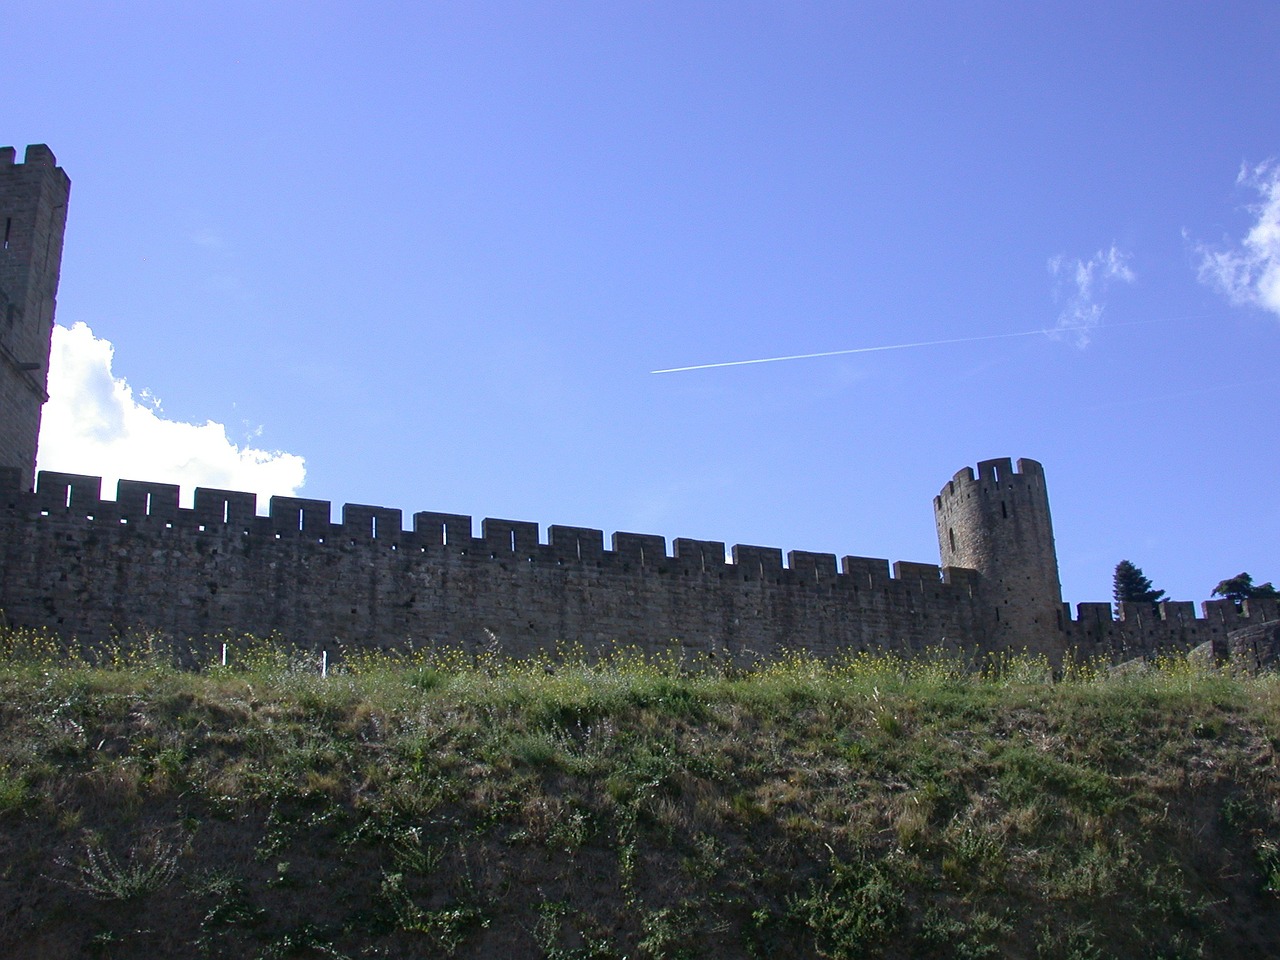 carcassonne ramparts medieval castle free photo